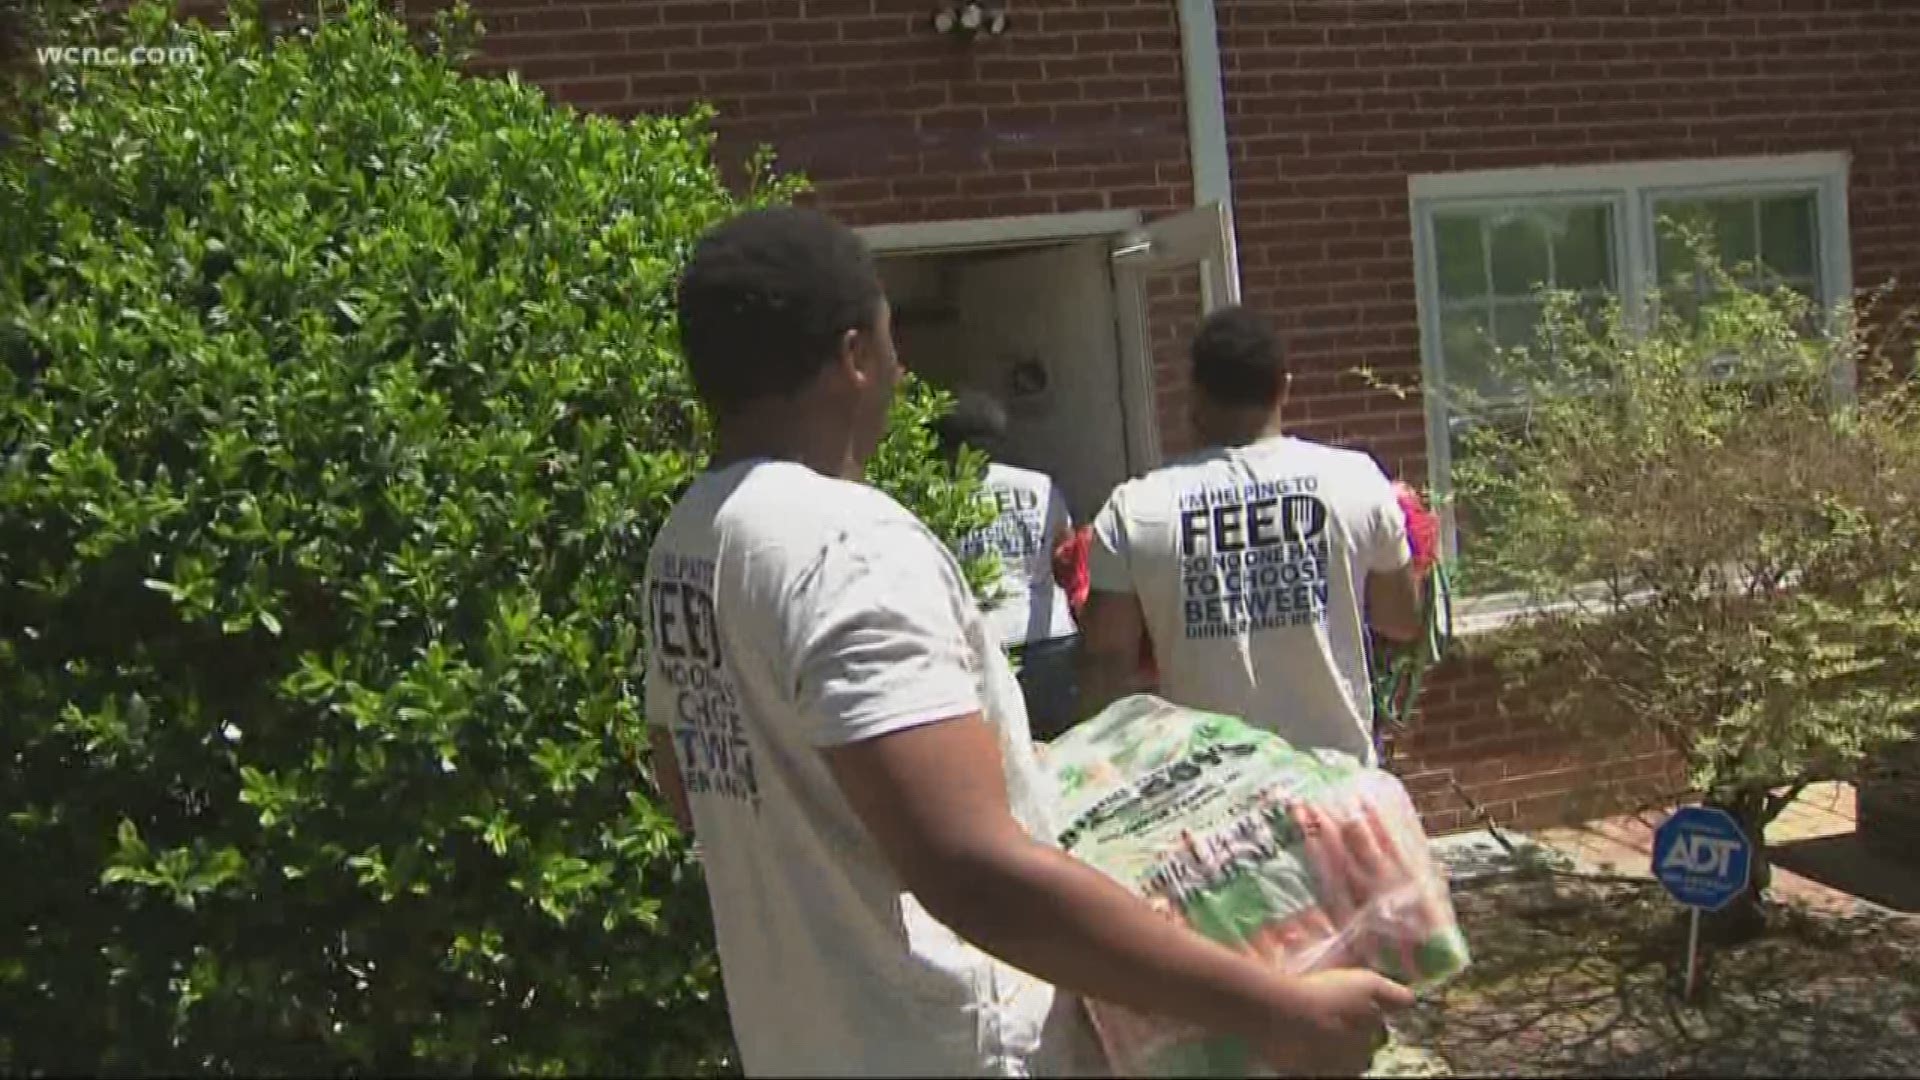 The Hearts and Hands Food Pantry in Huntersville is now full of fresh and non-perishable items thanks to Food Lion. The company says they are committed to ending hunger in the community.